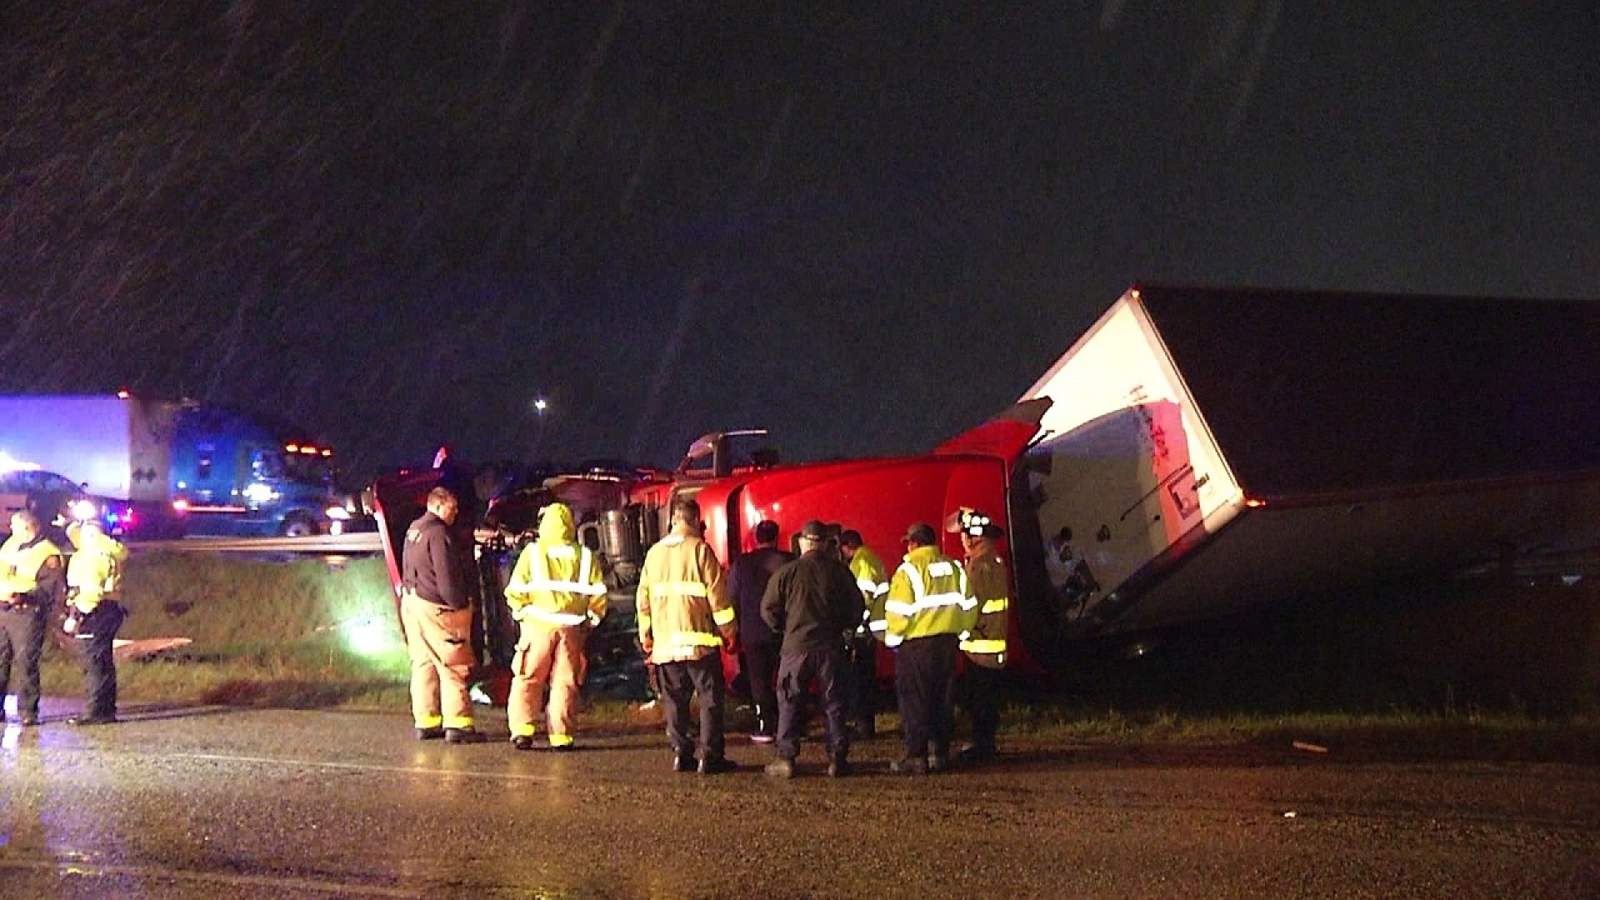 18-wheeler crash shuts down part of South Side highway overnight